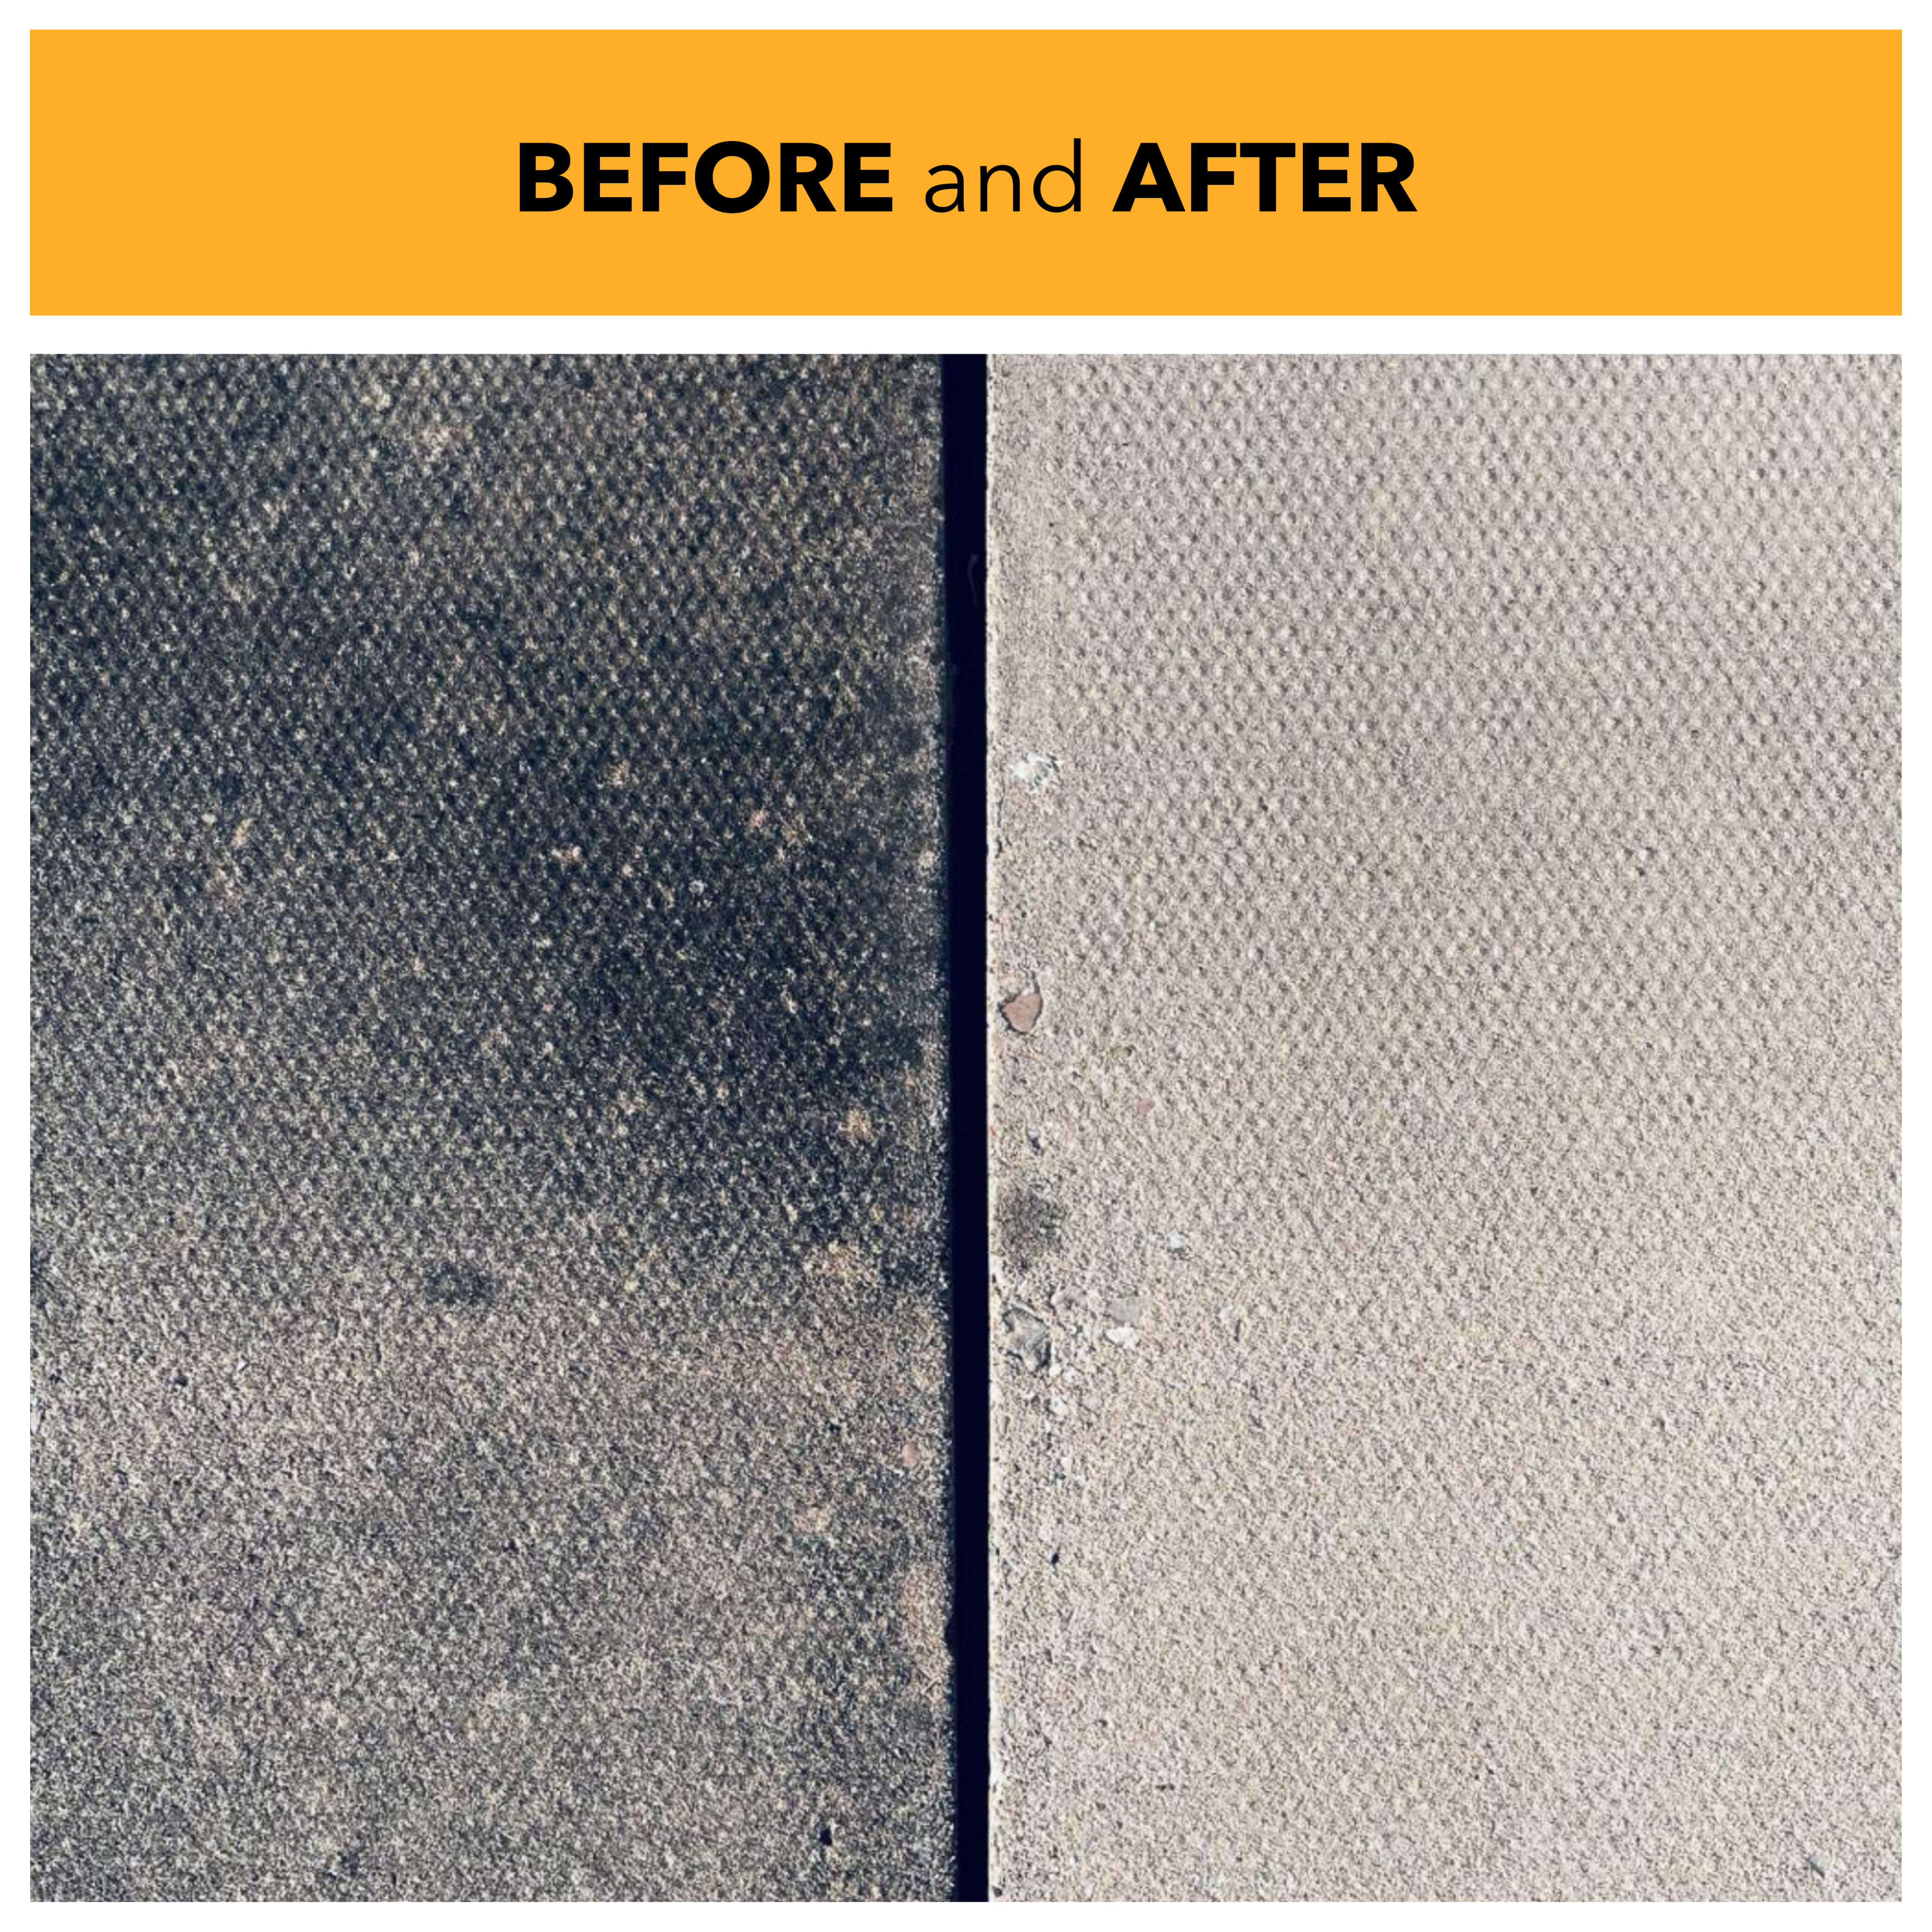 Before and after using JCB Black Spot Remover